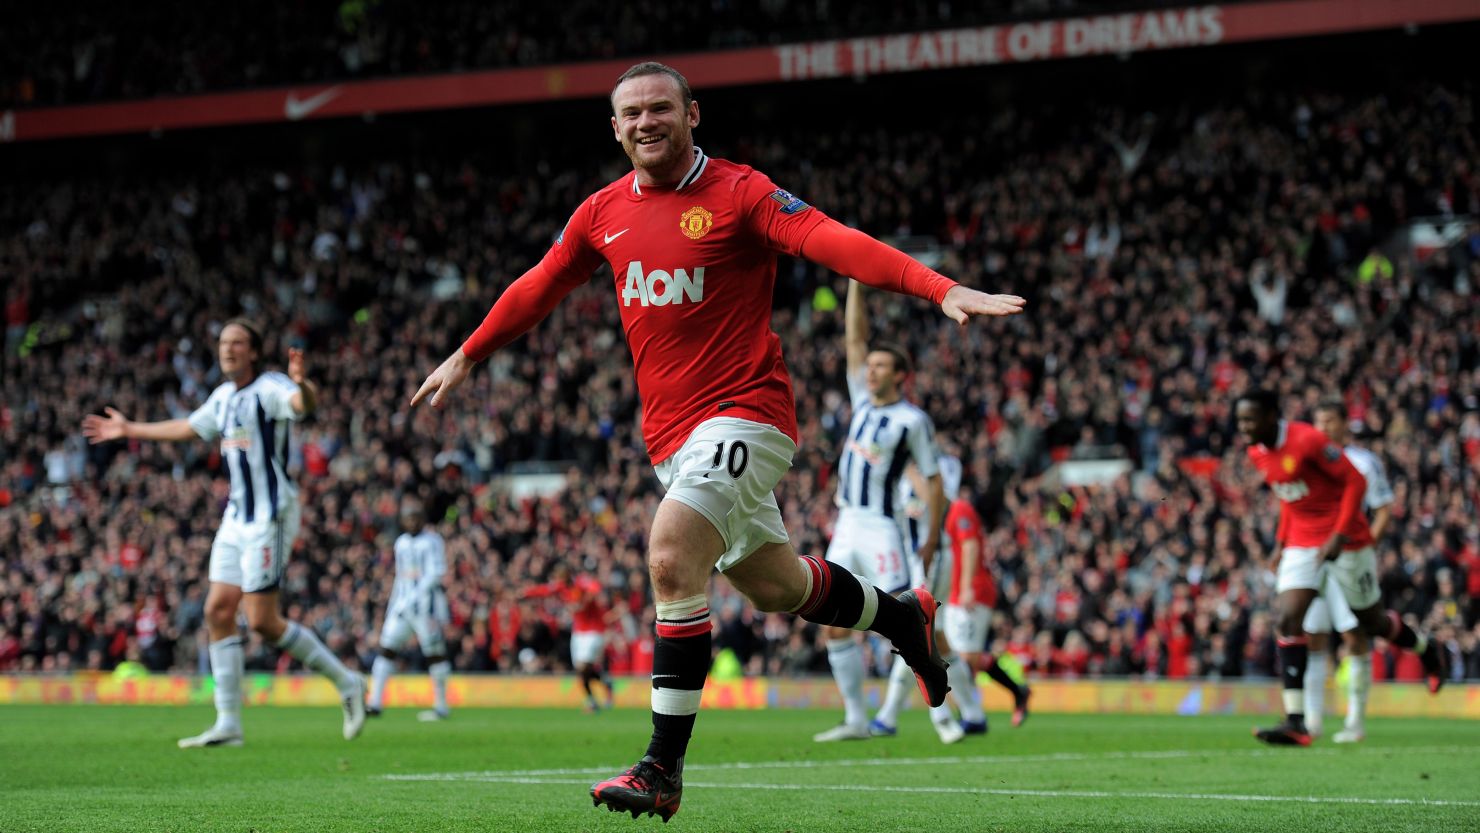 Wayne Rooney celebrates scoring the first of his two goals as Manchester United went top of the English Premier League.